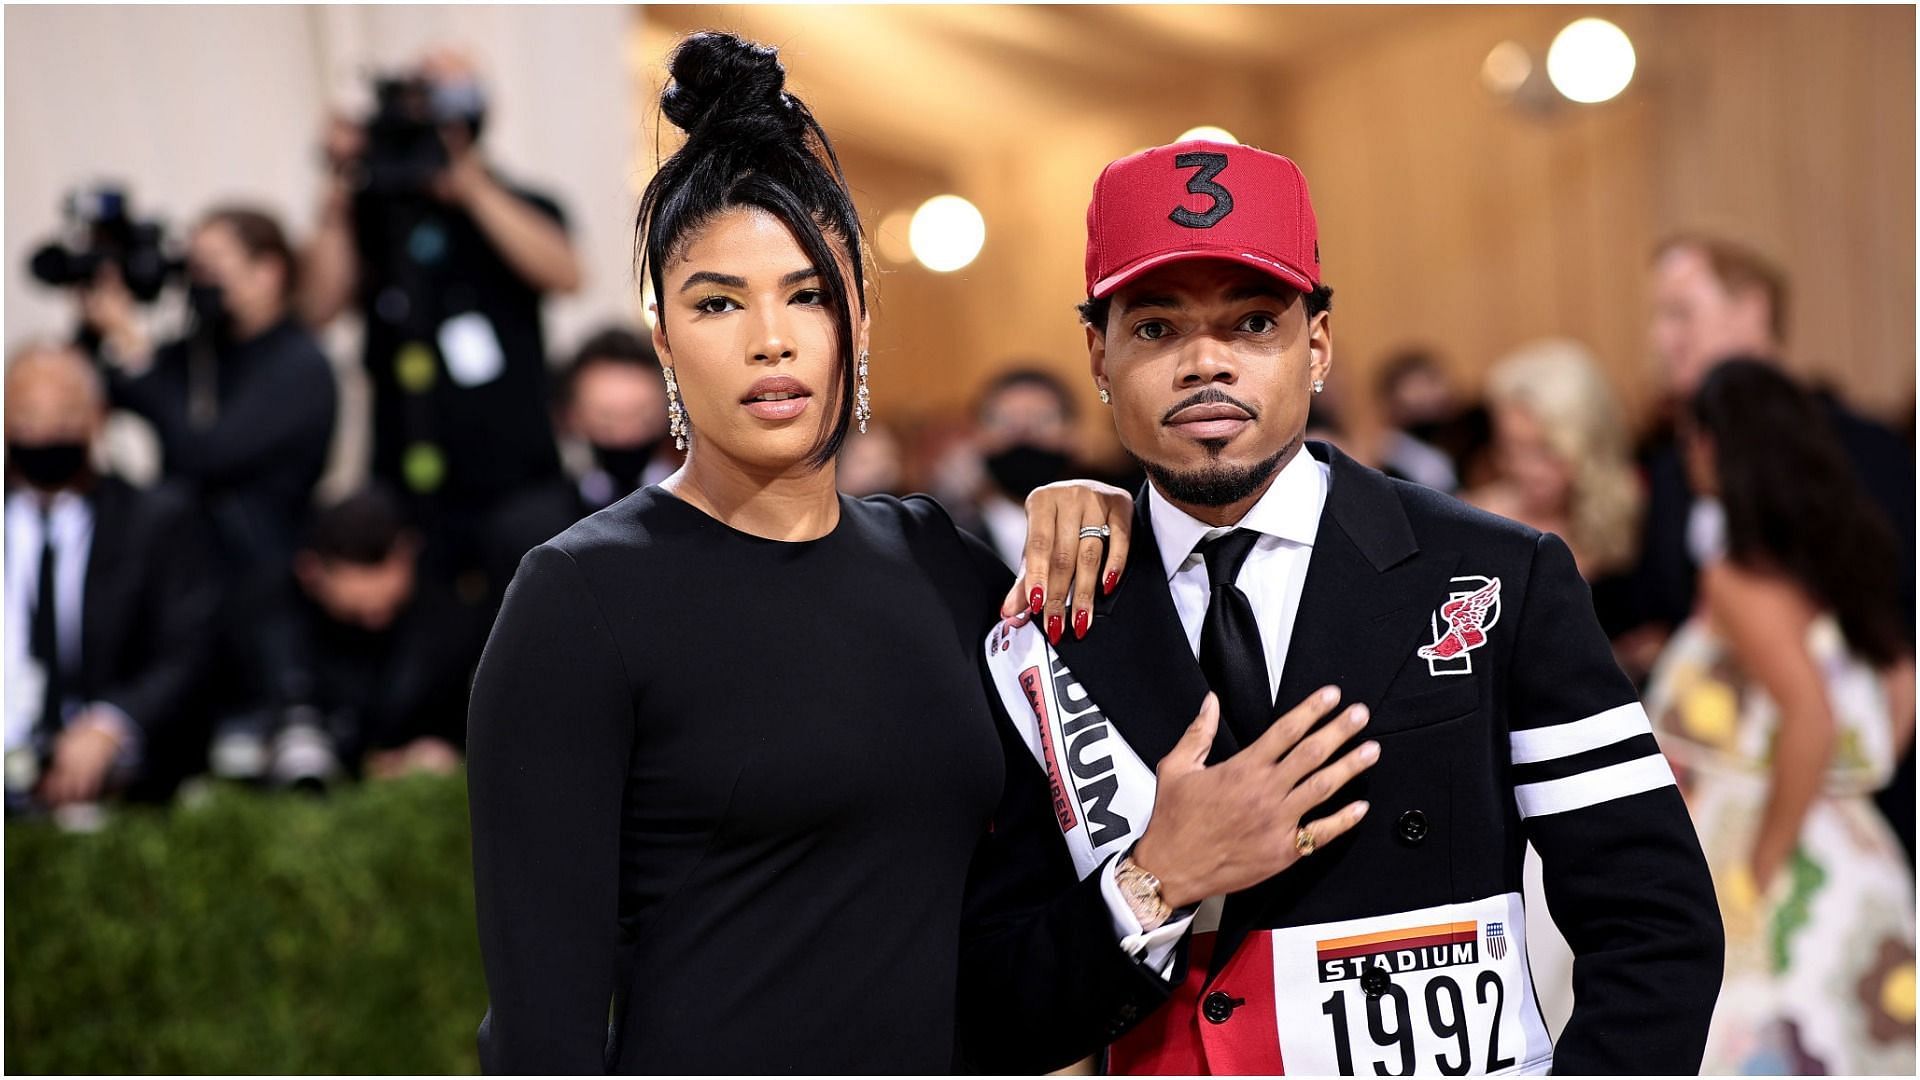 Kirsten Corley and Chance the Rapper attend The 2021 Met Gala Celebrating In America: A Lexicon Of Fashion at Metropolitan Museum of Art on September 13, 2021 in New York City. (Image via Getty Images)